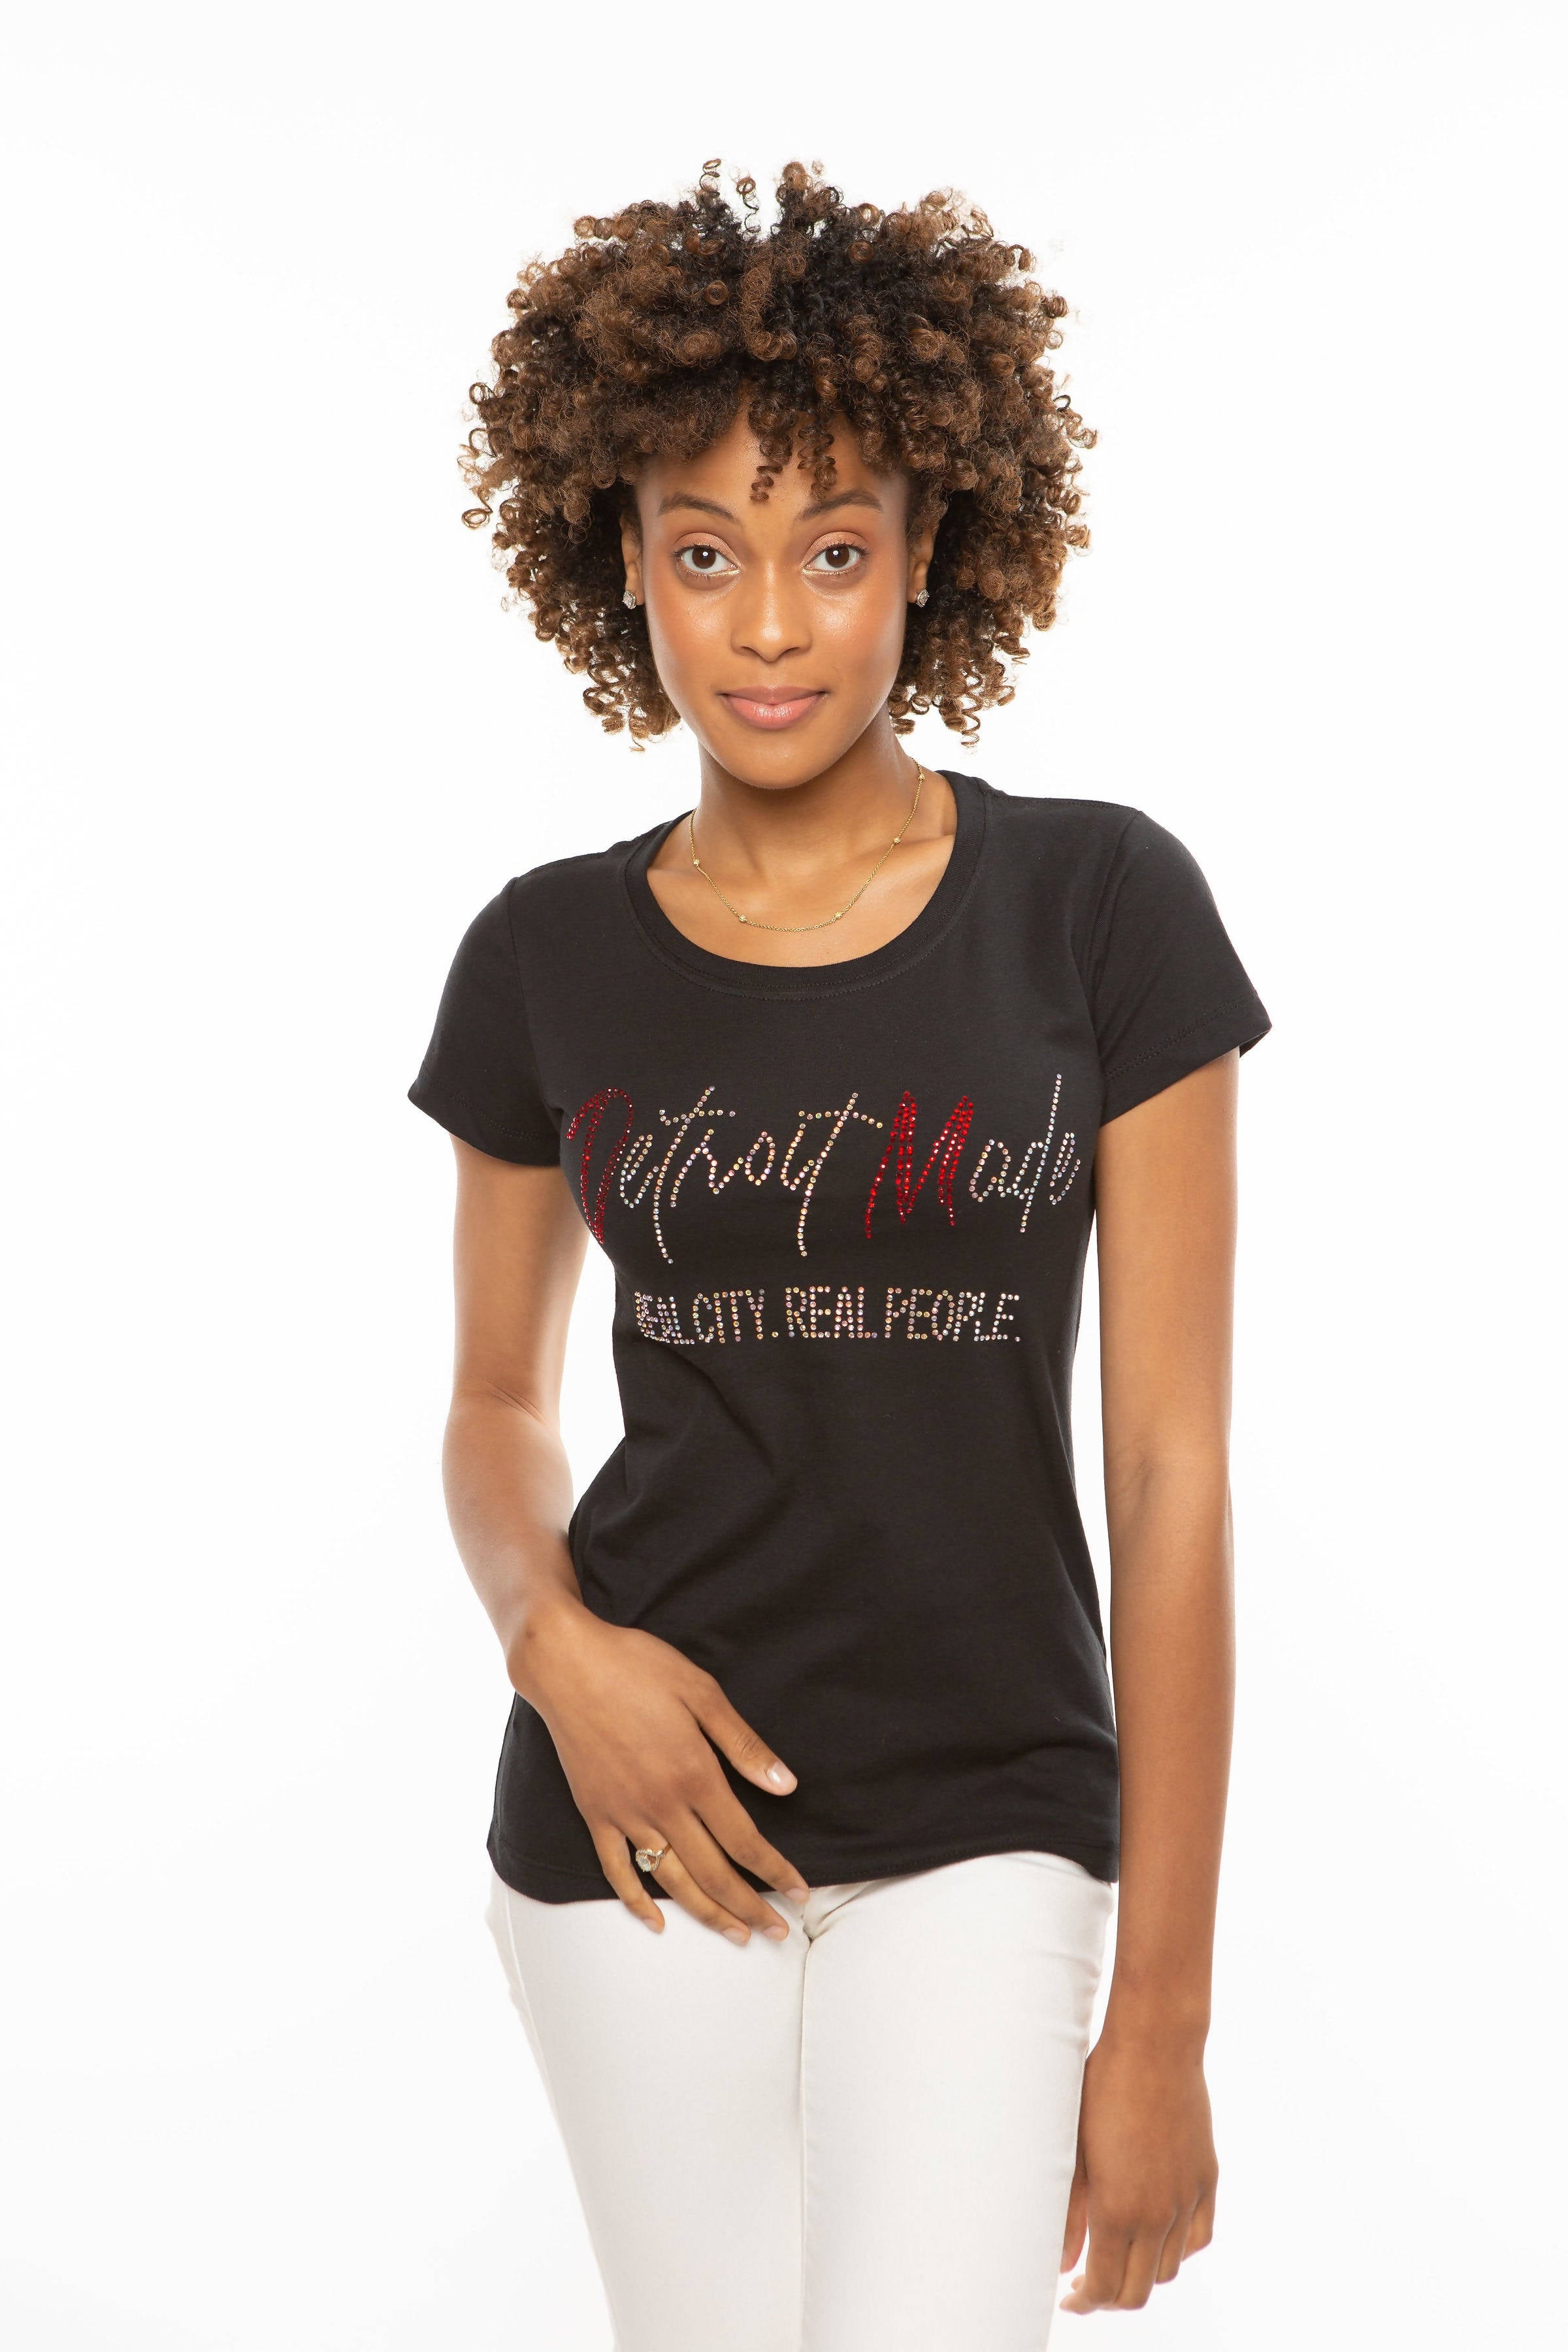 Detroit Made Women's Fitted Bling Tee - Crew Neck – All Things